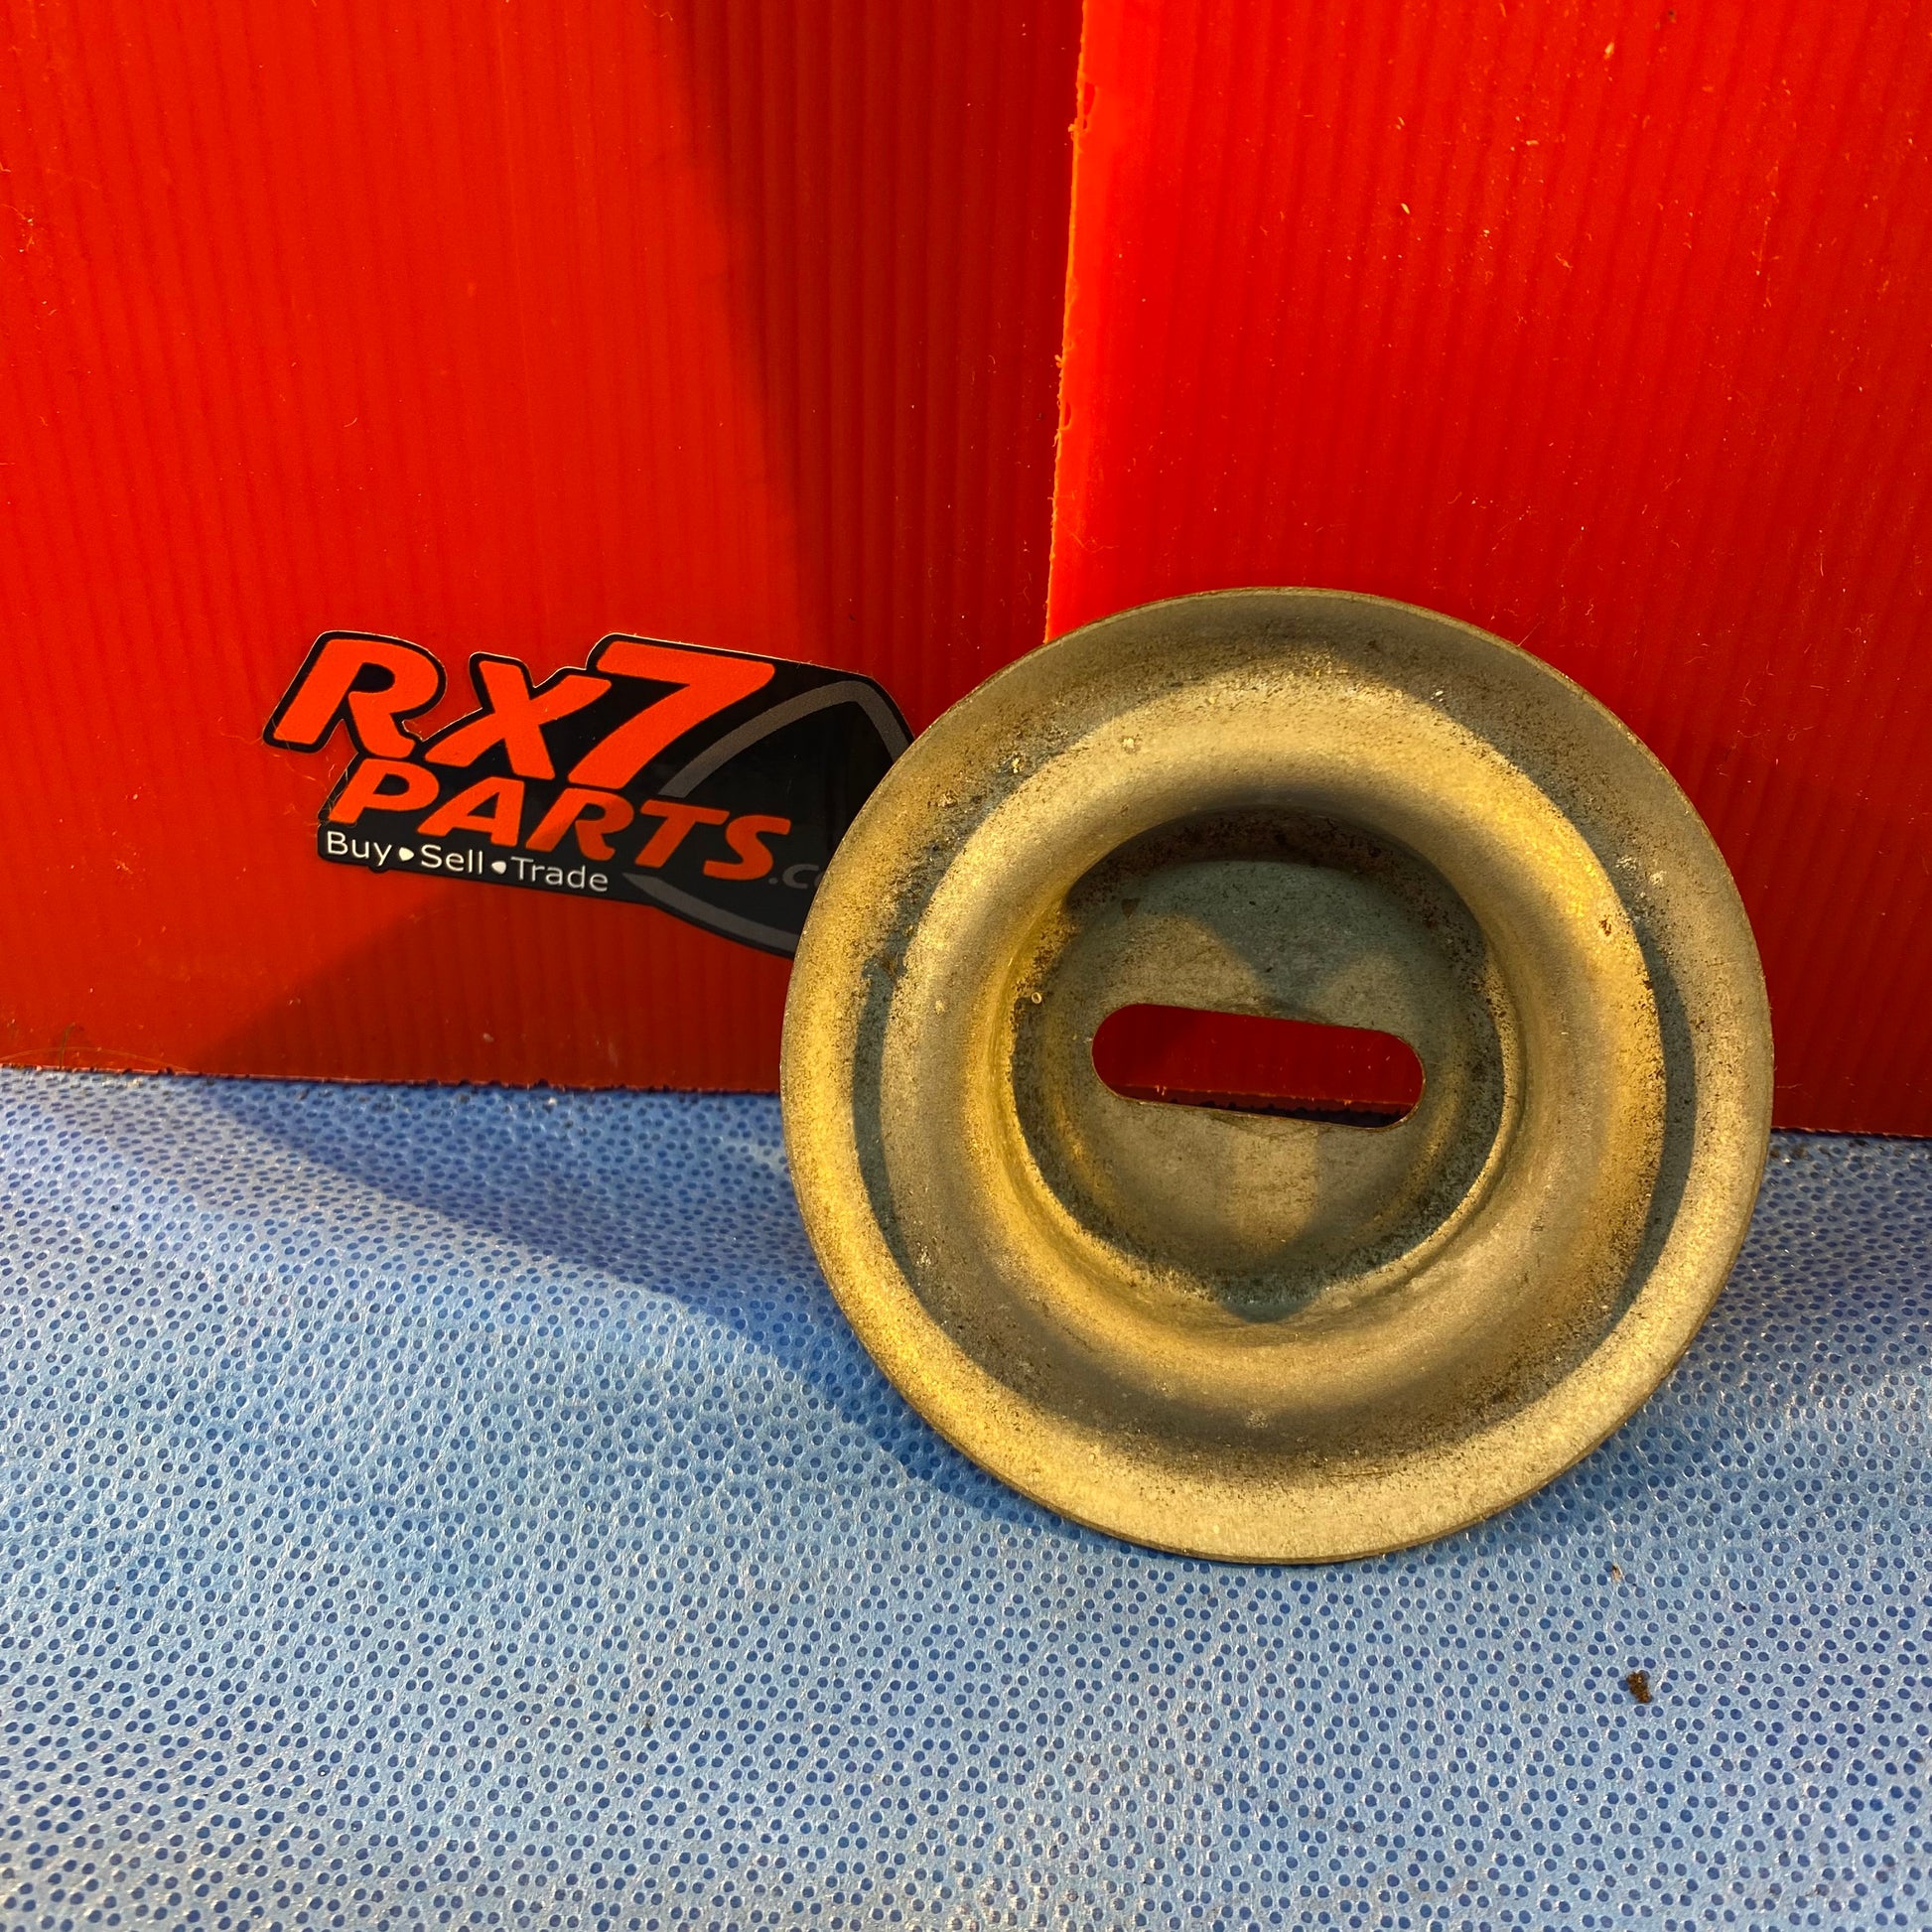 LHD, RHD Spare Tire Retainer Ring/Washer : Metal   Mazda Rx7 FD3S FD S4B4STR2 - RX7Parts